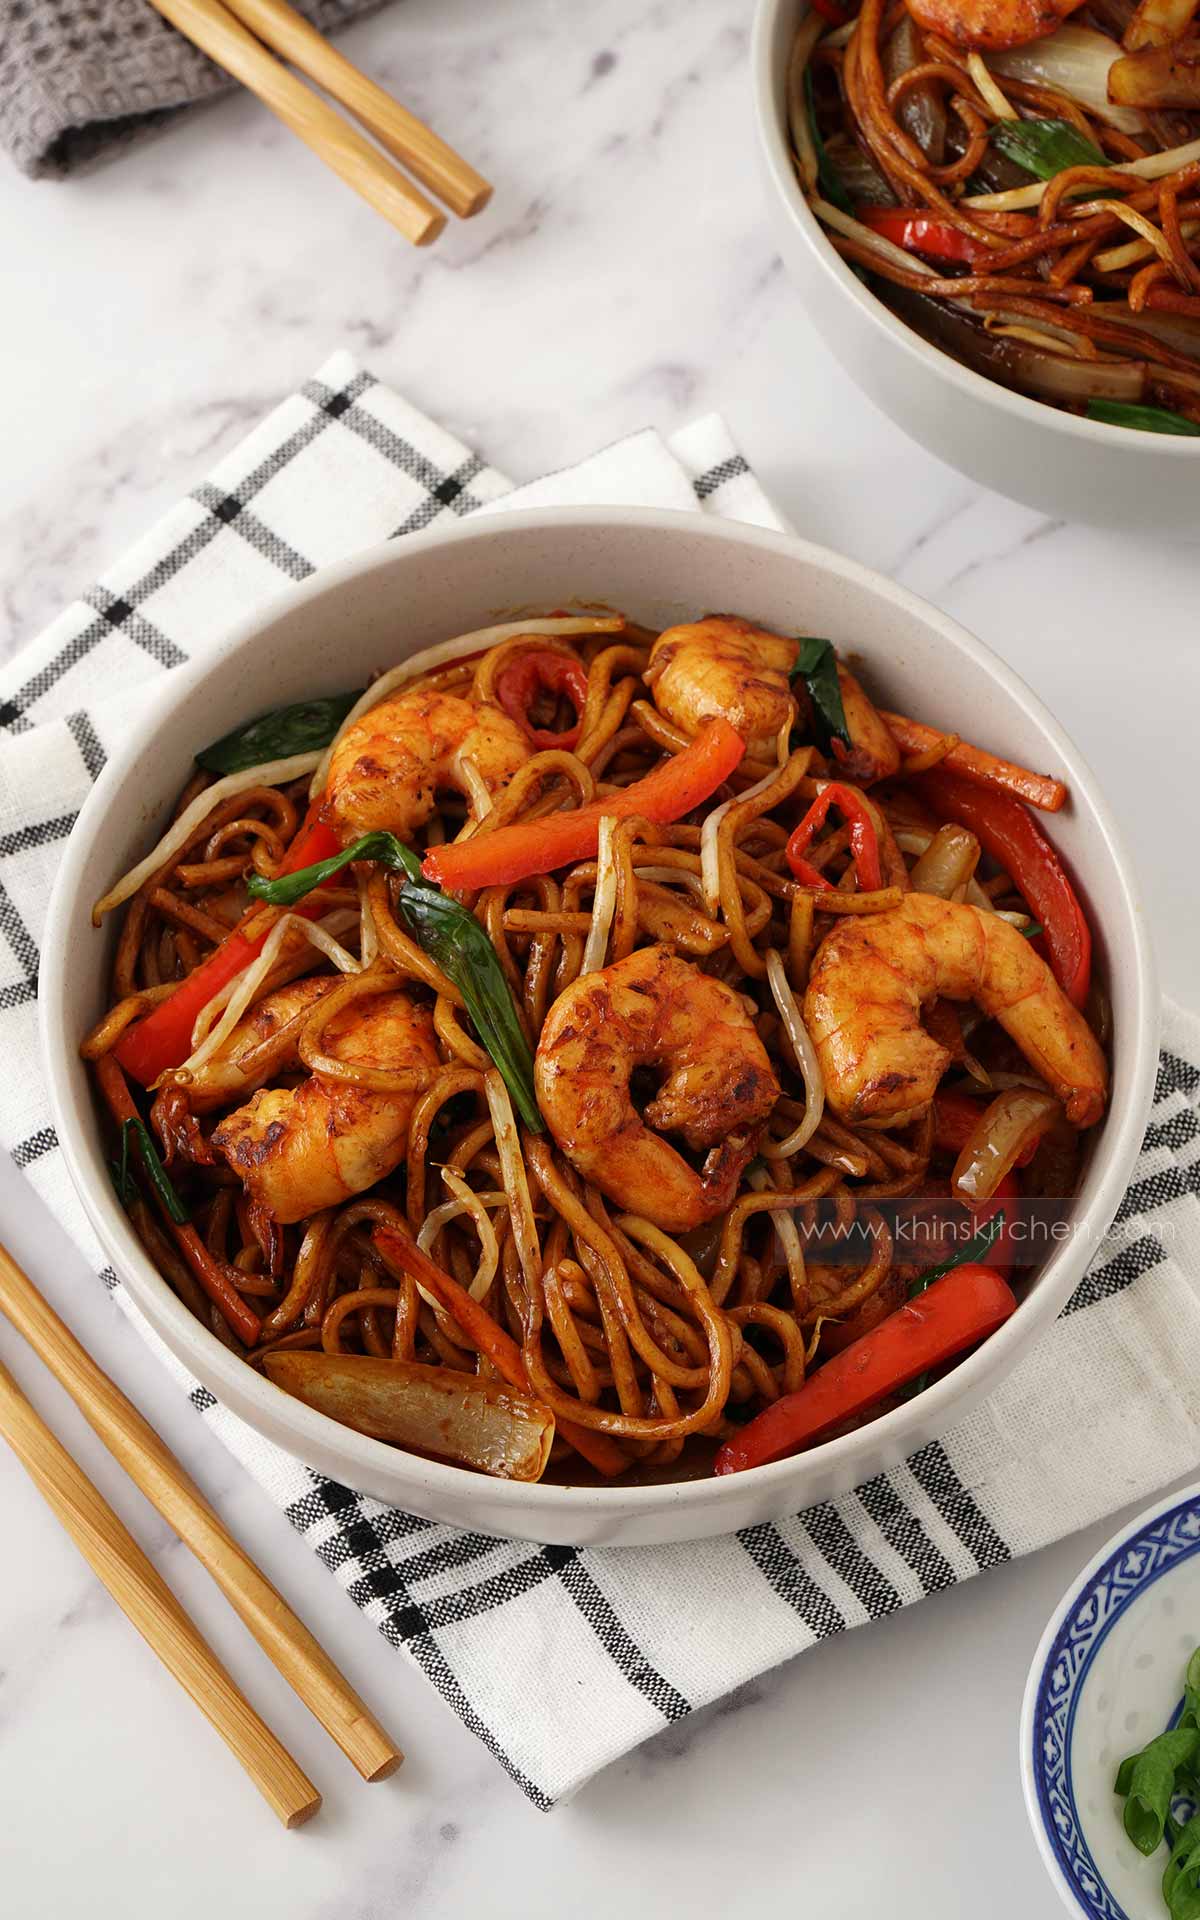 A white bowl containing stir fry noodles and prawns with vegetables, displayed on the white towel. 